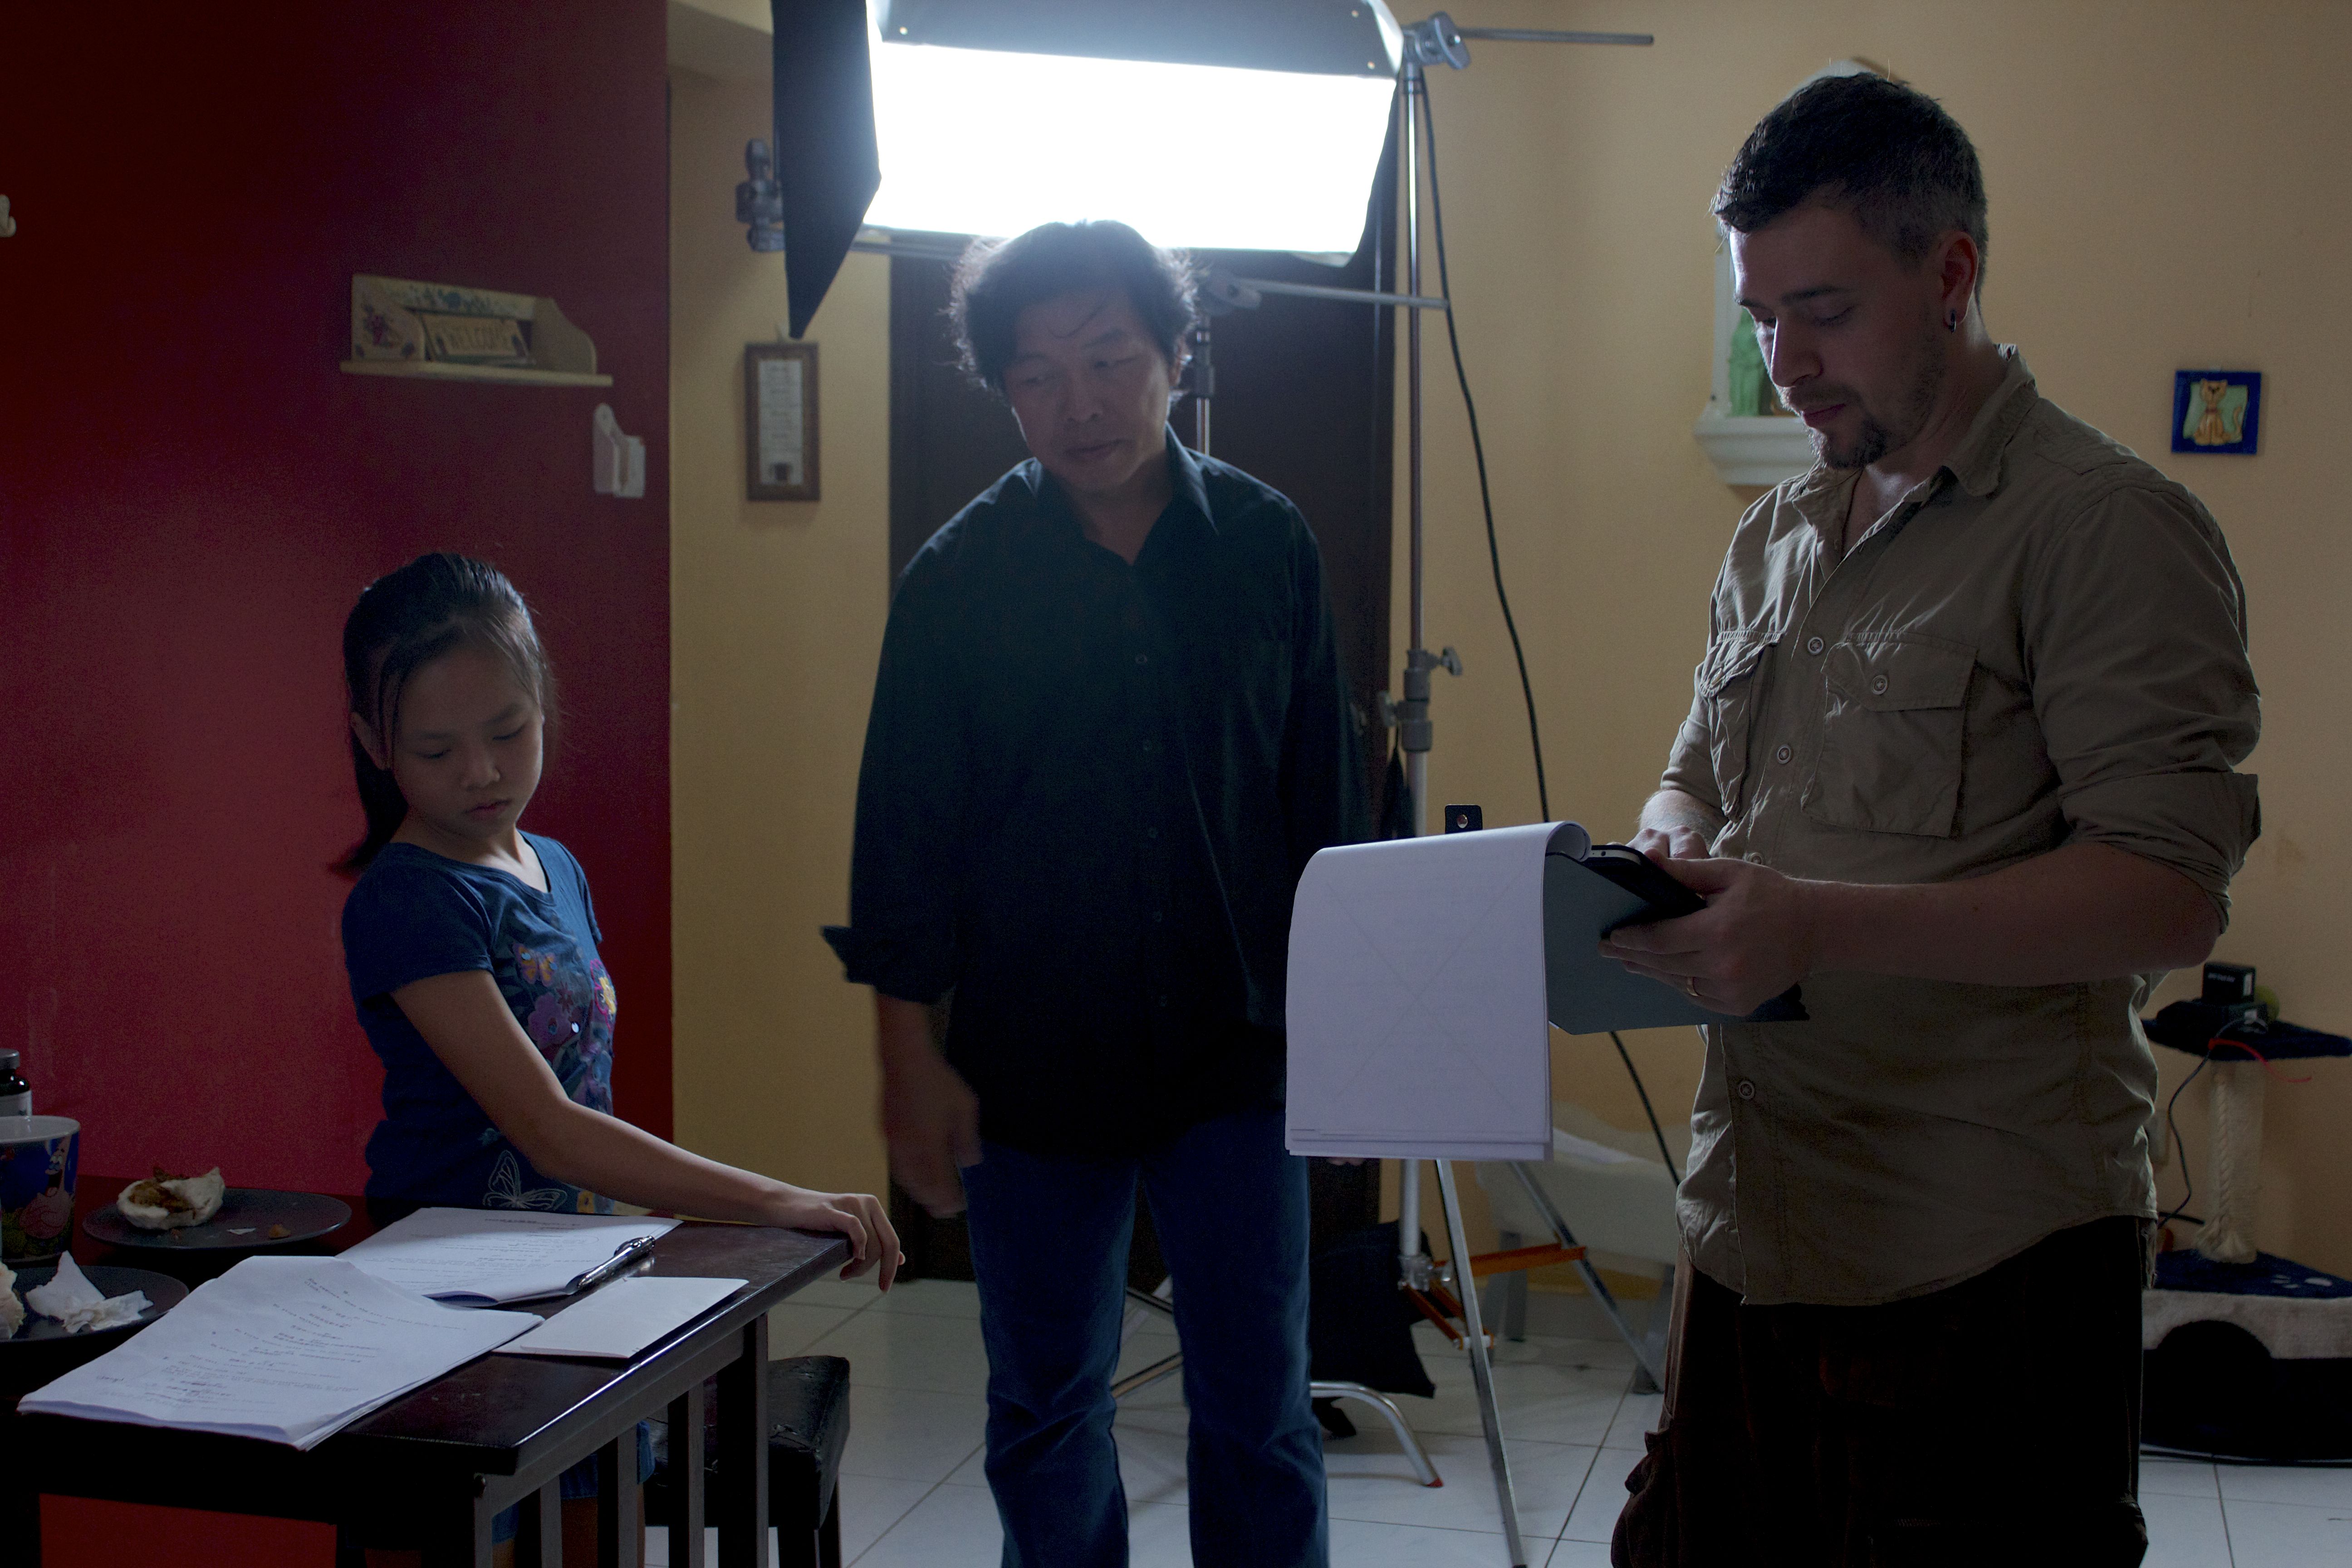 Shawn Sigler with Michael Chua and Kacie Tan on the set of 